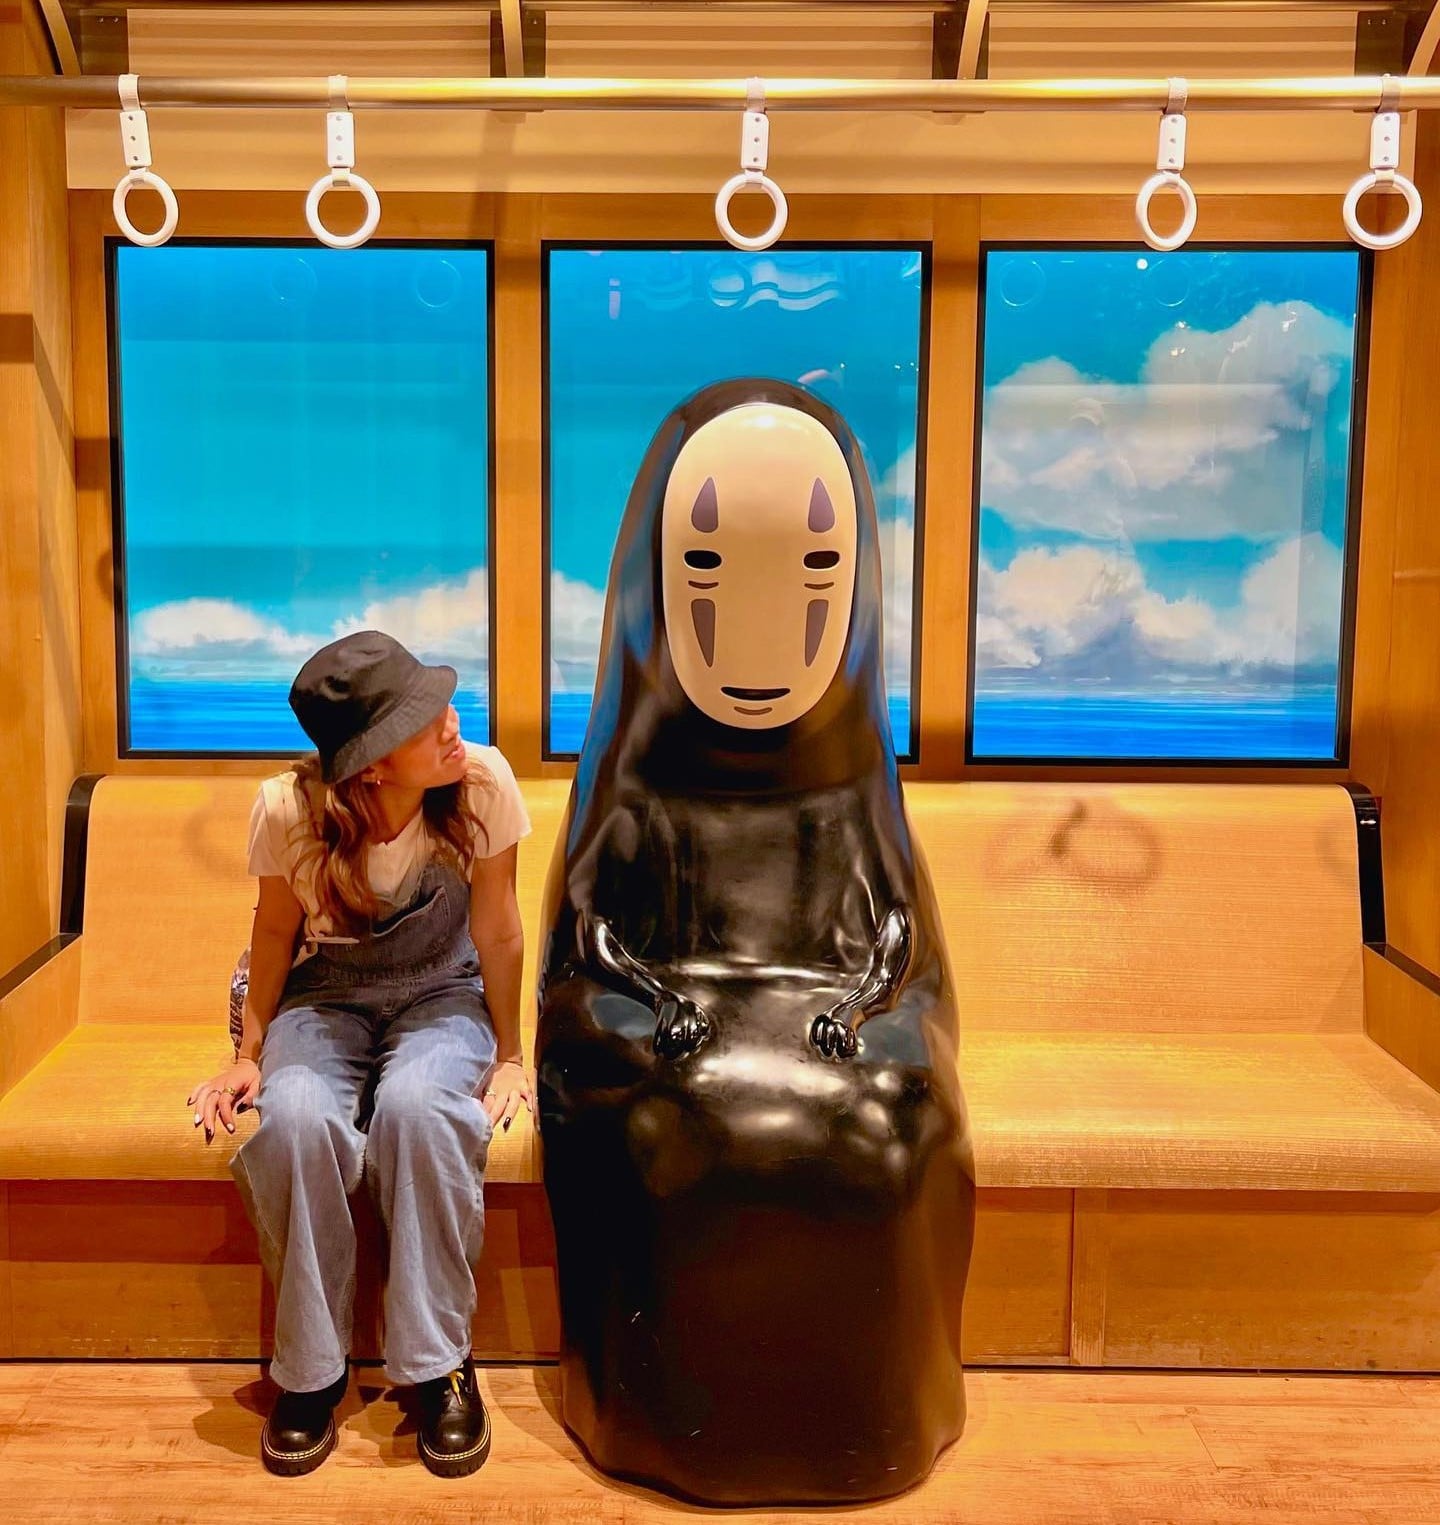 New & upcoming theme parks in Asia - Ghibli Park with No Face figure